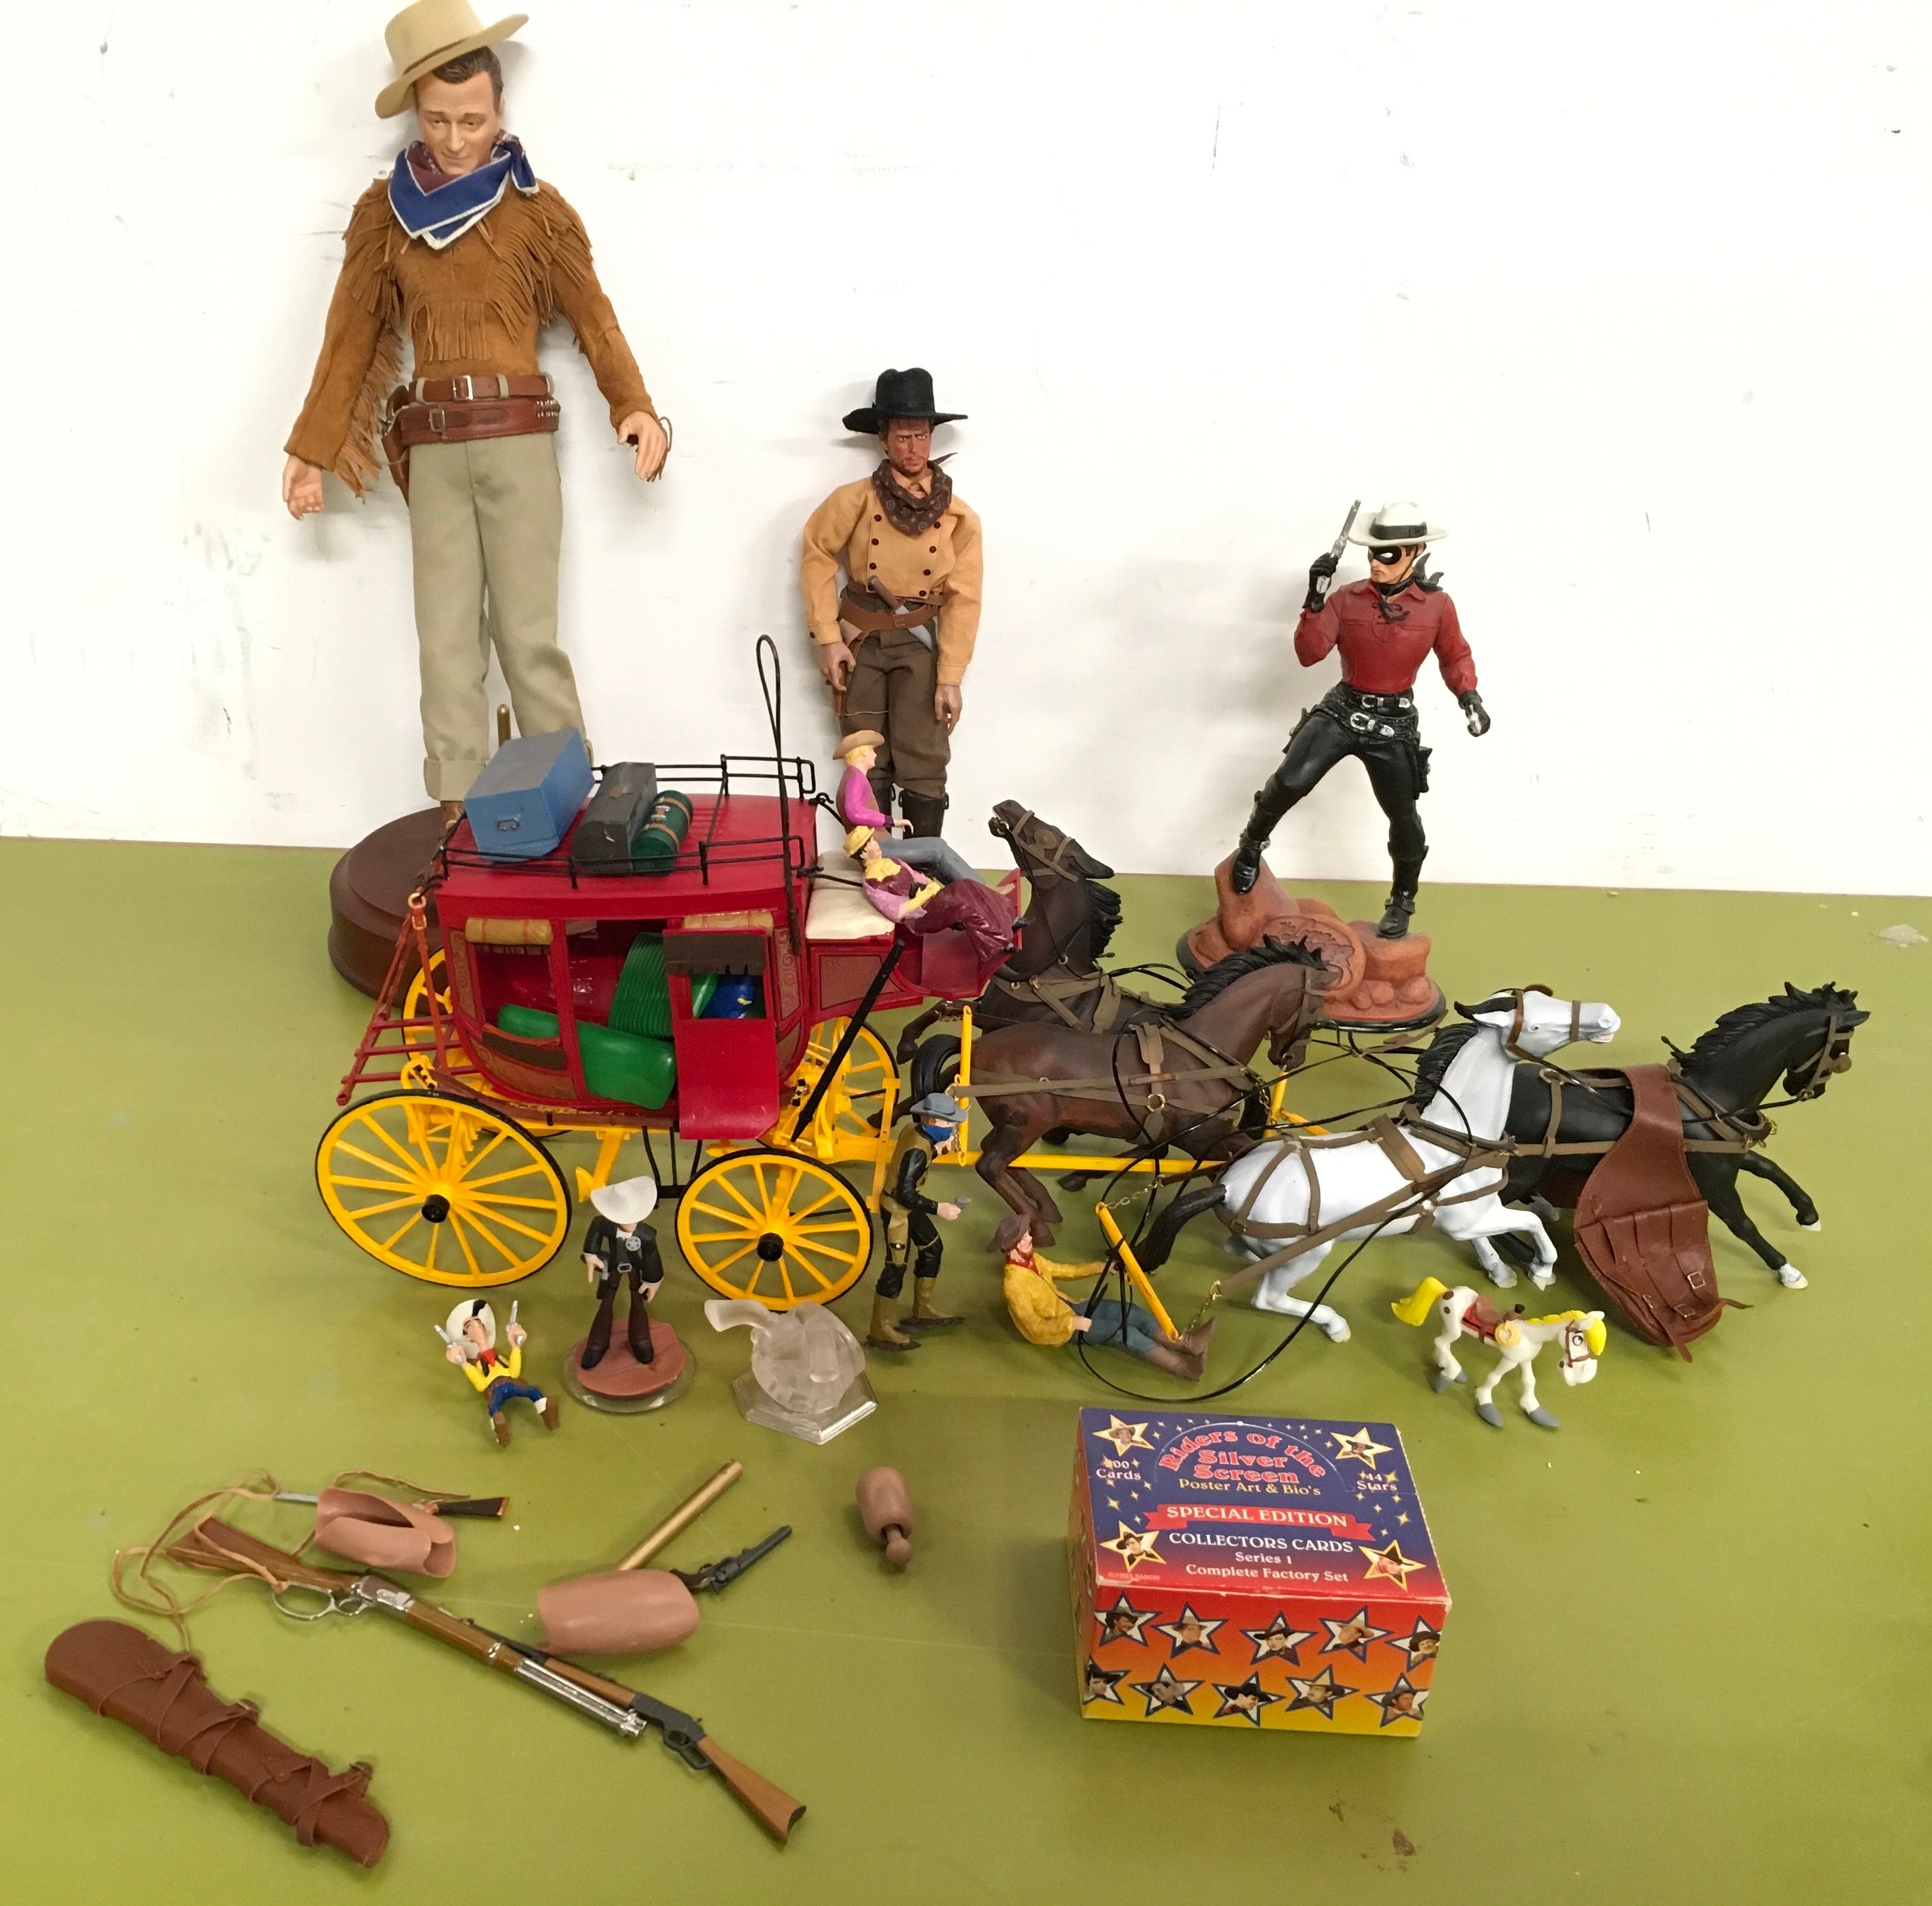 Collection Wild West related items to include stagecoach, musical John Wayne figure, The Lone Ranger